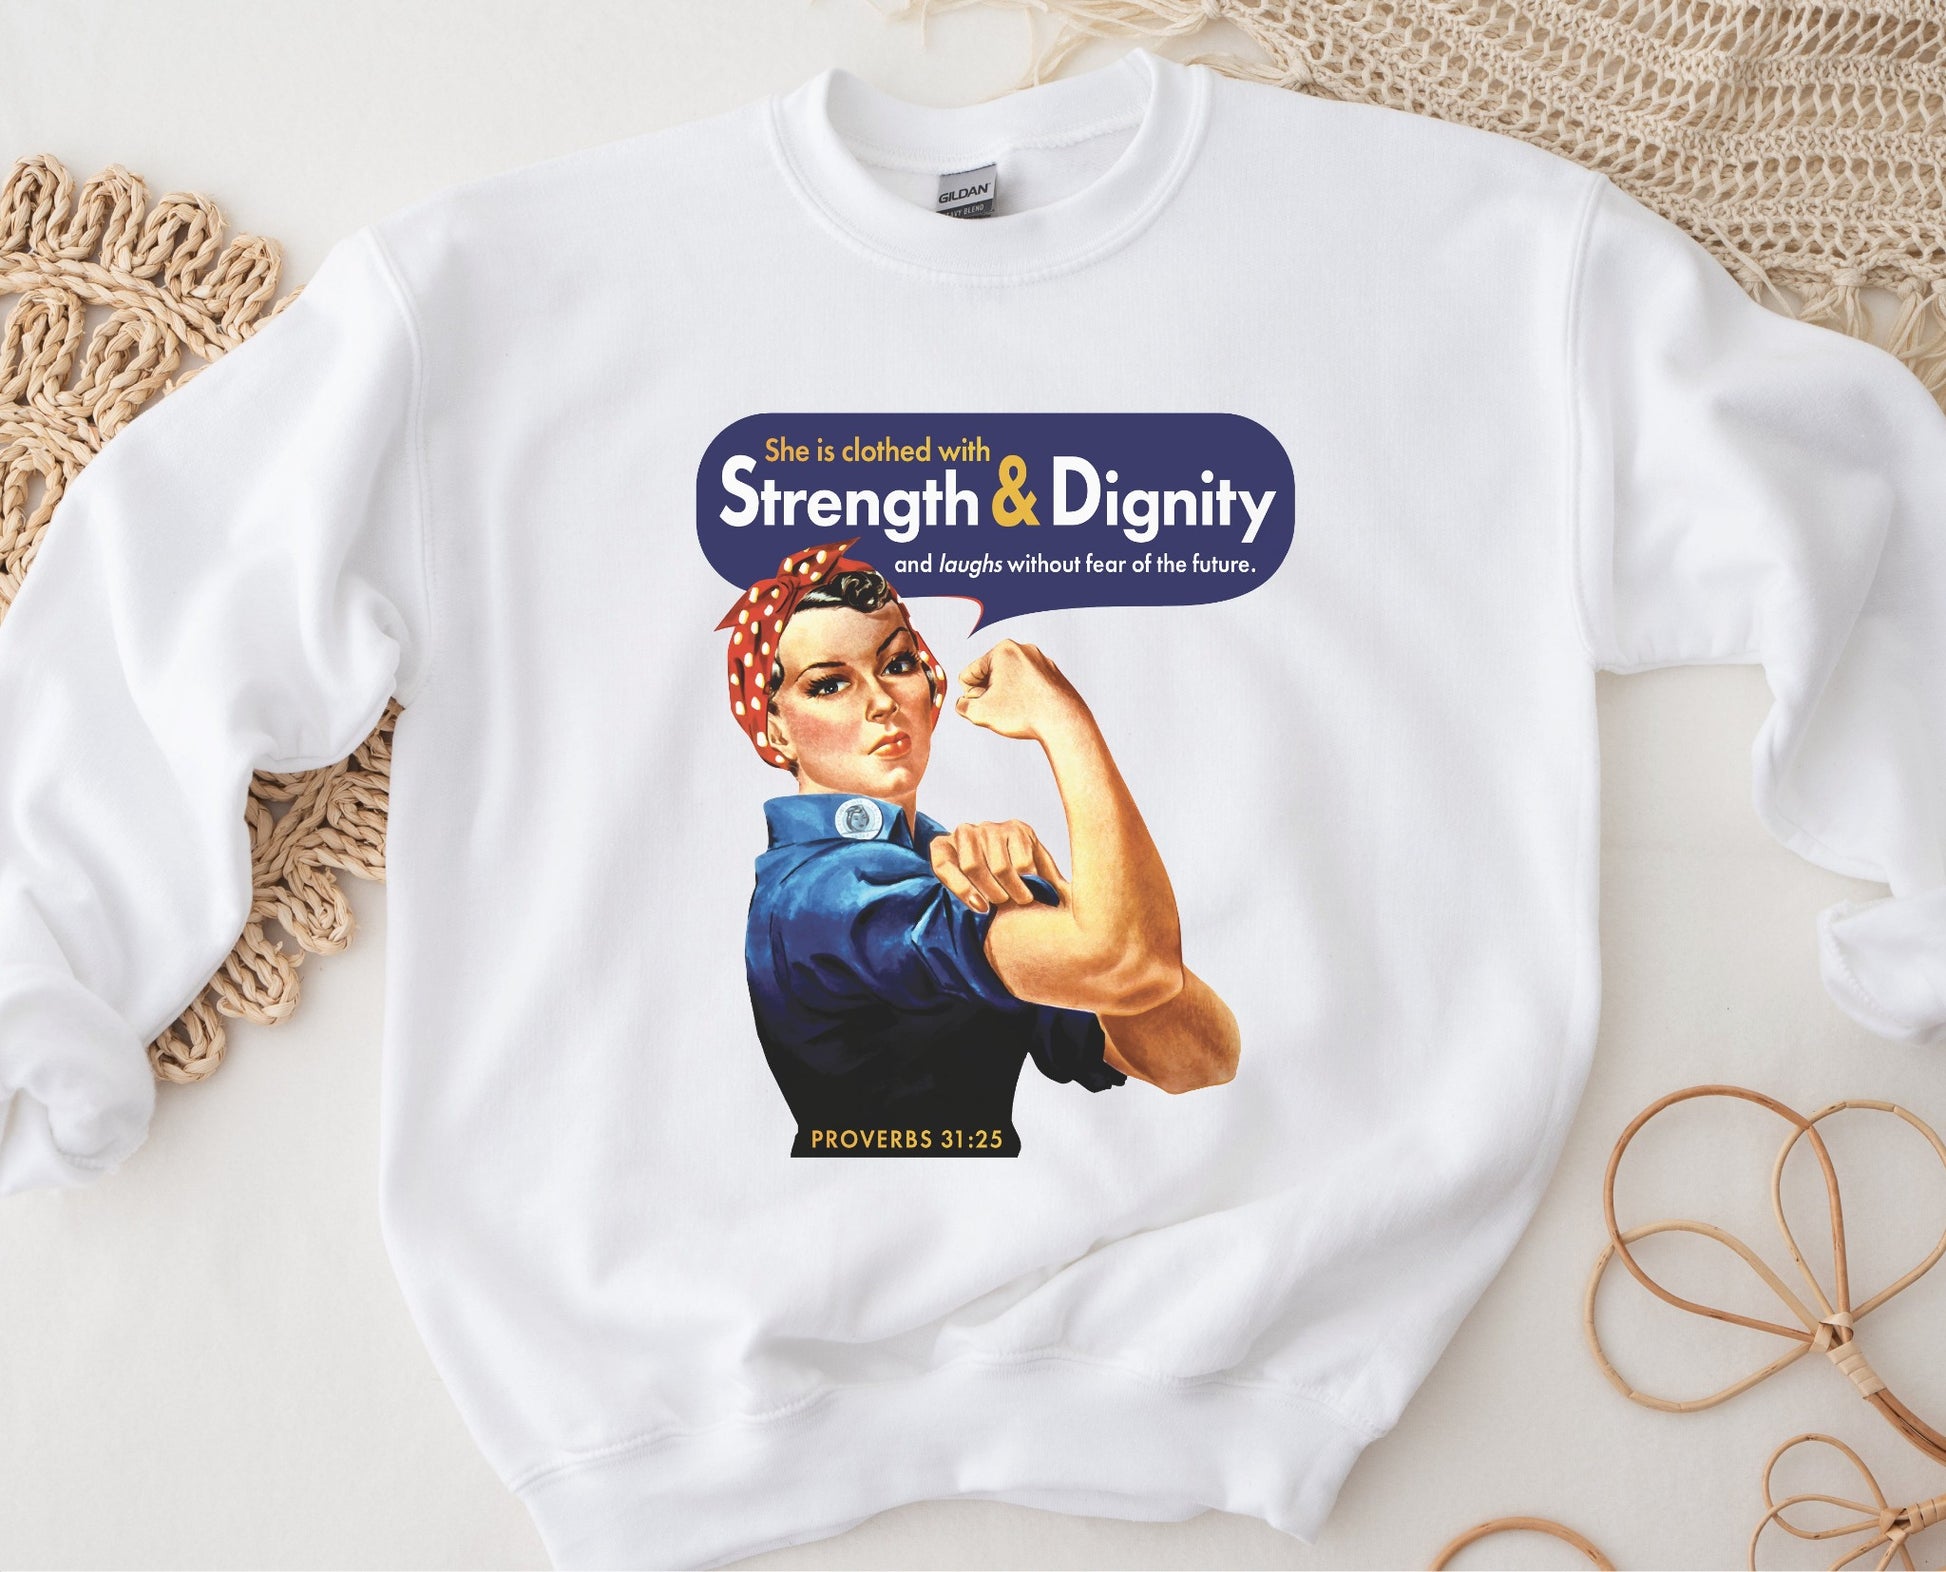 Rosie the Riveter Proverbs 31 Woman Christian aesthetic with iconic vintage female muscle design printed in red gold and navy blue on cozy white unisex crewneck sweatshirt for women